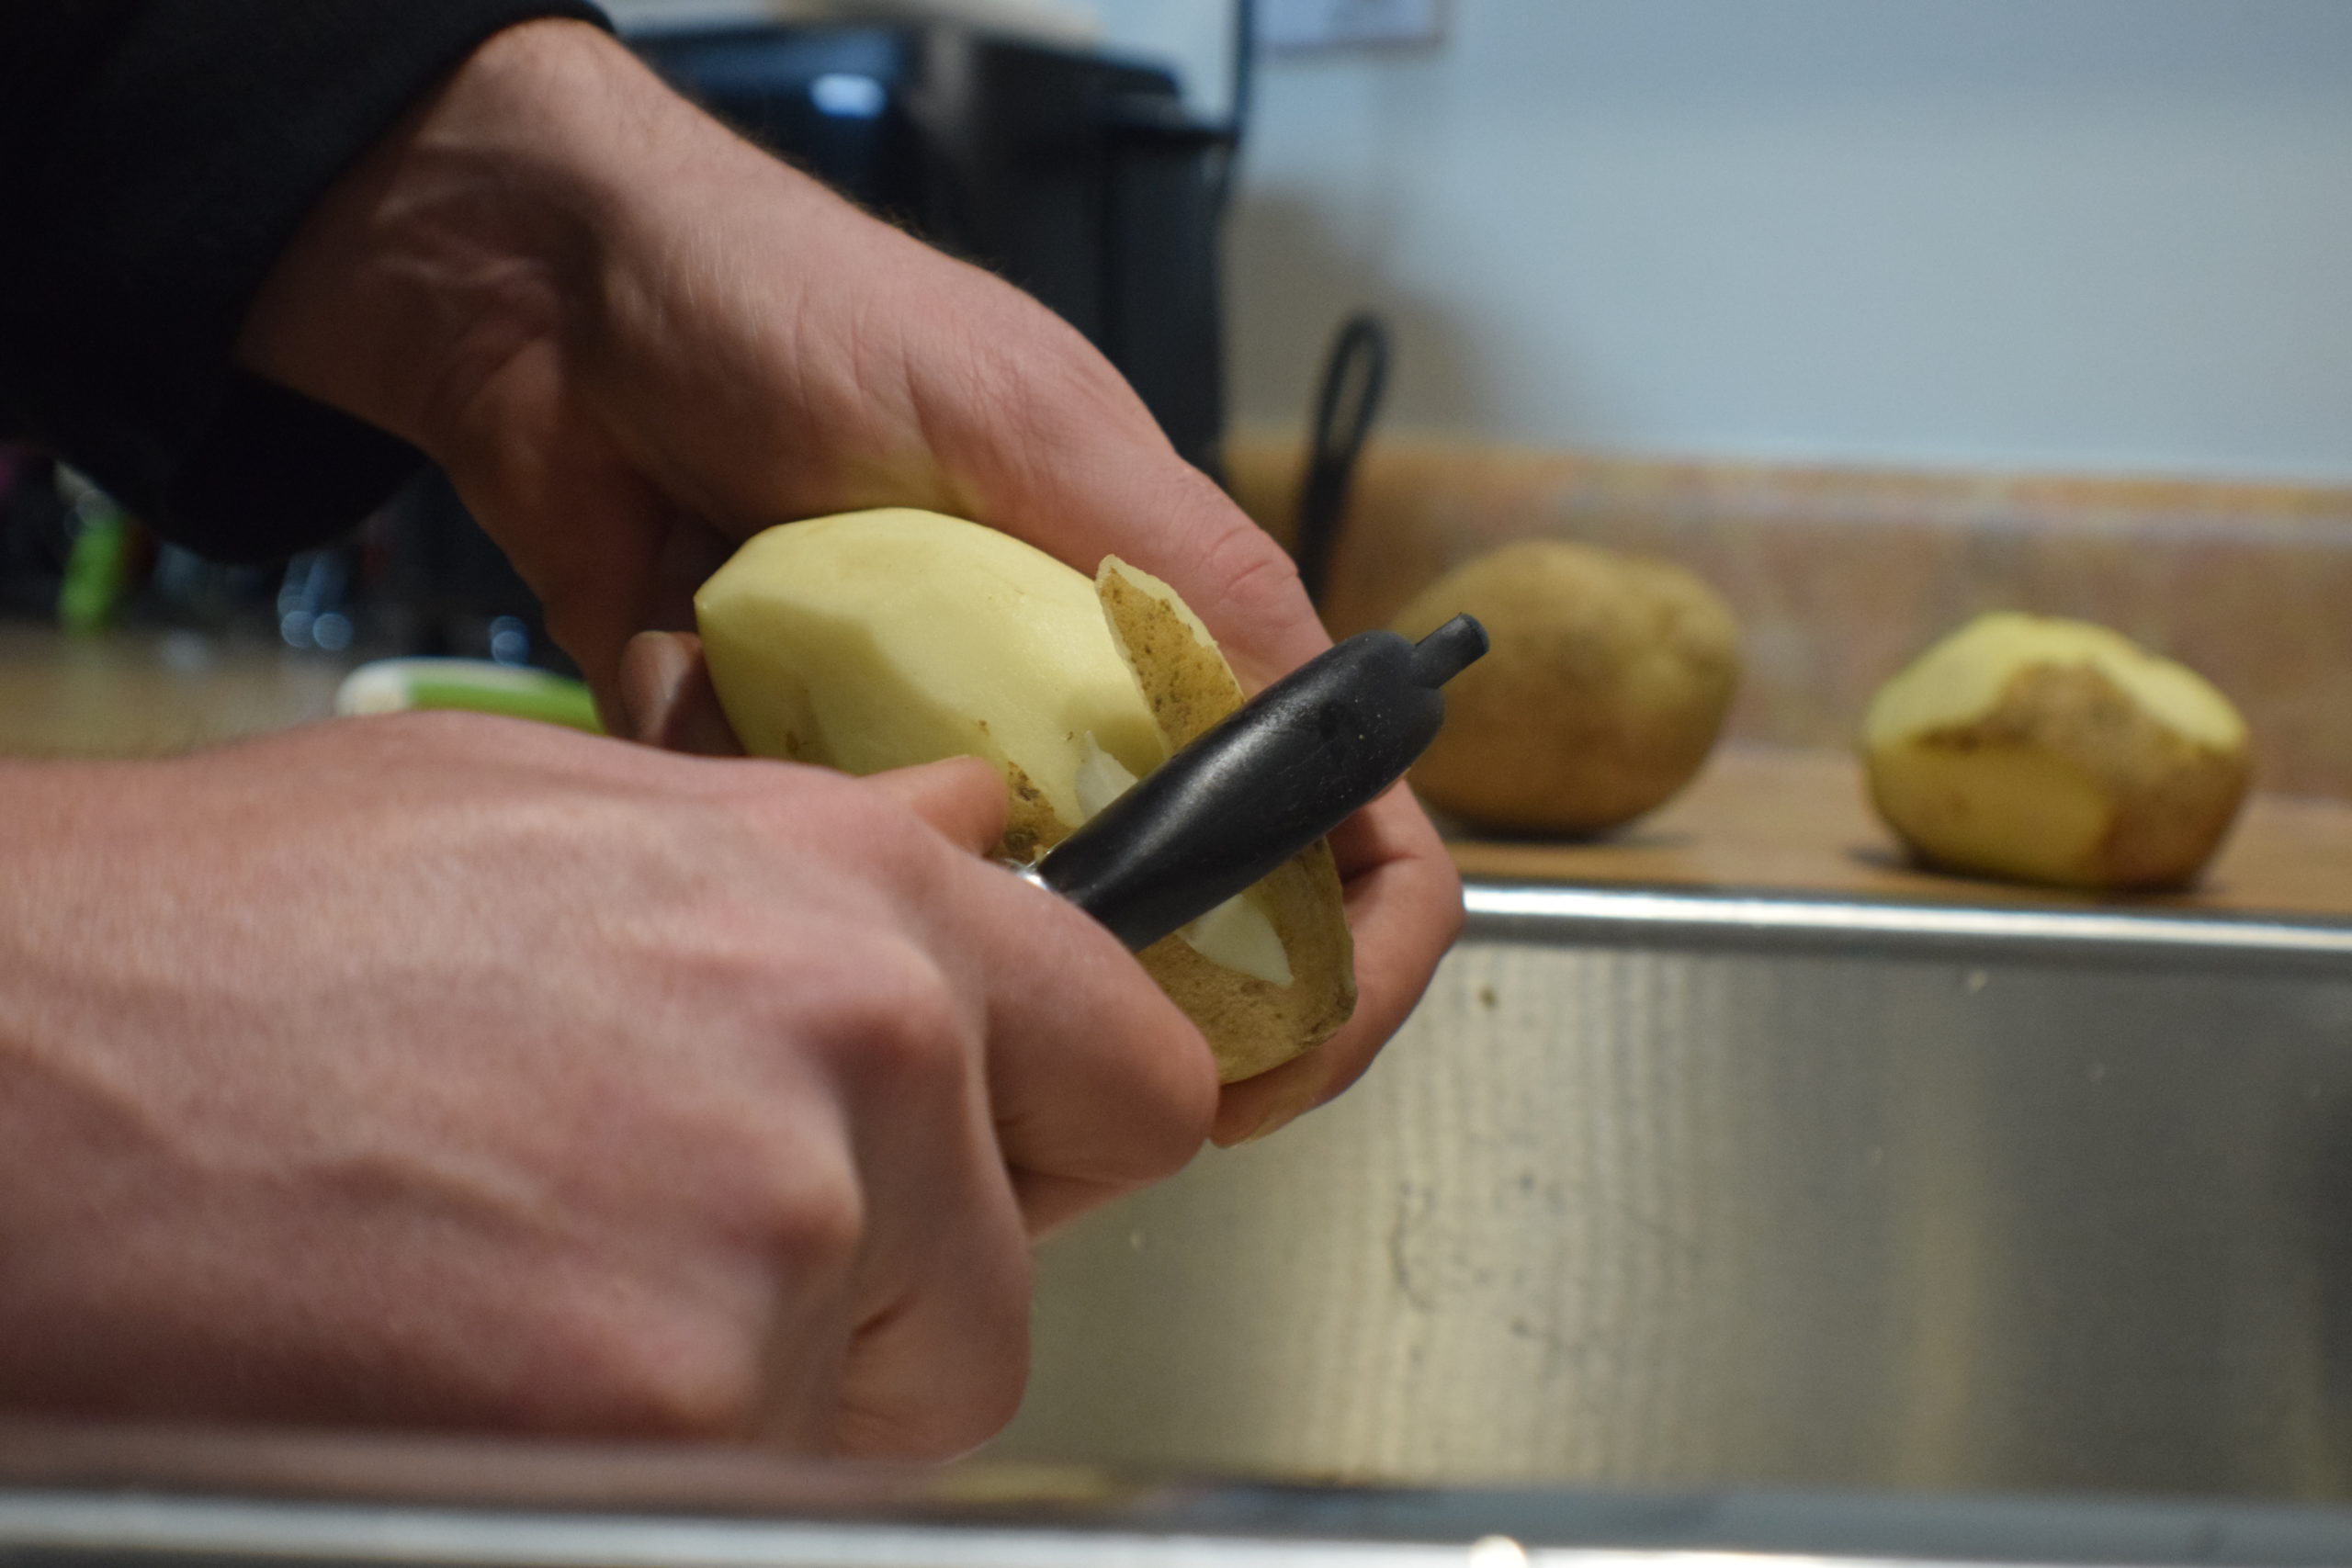 hands peeling potato in a sink with a potato holder